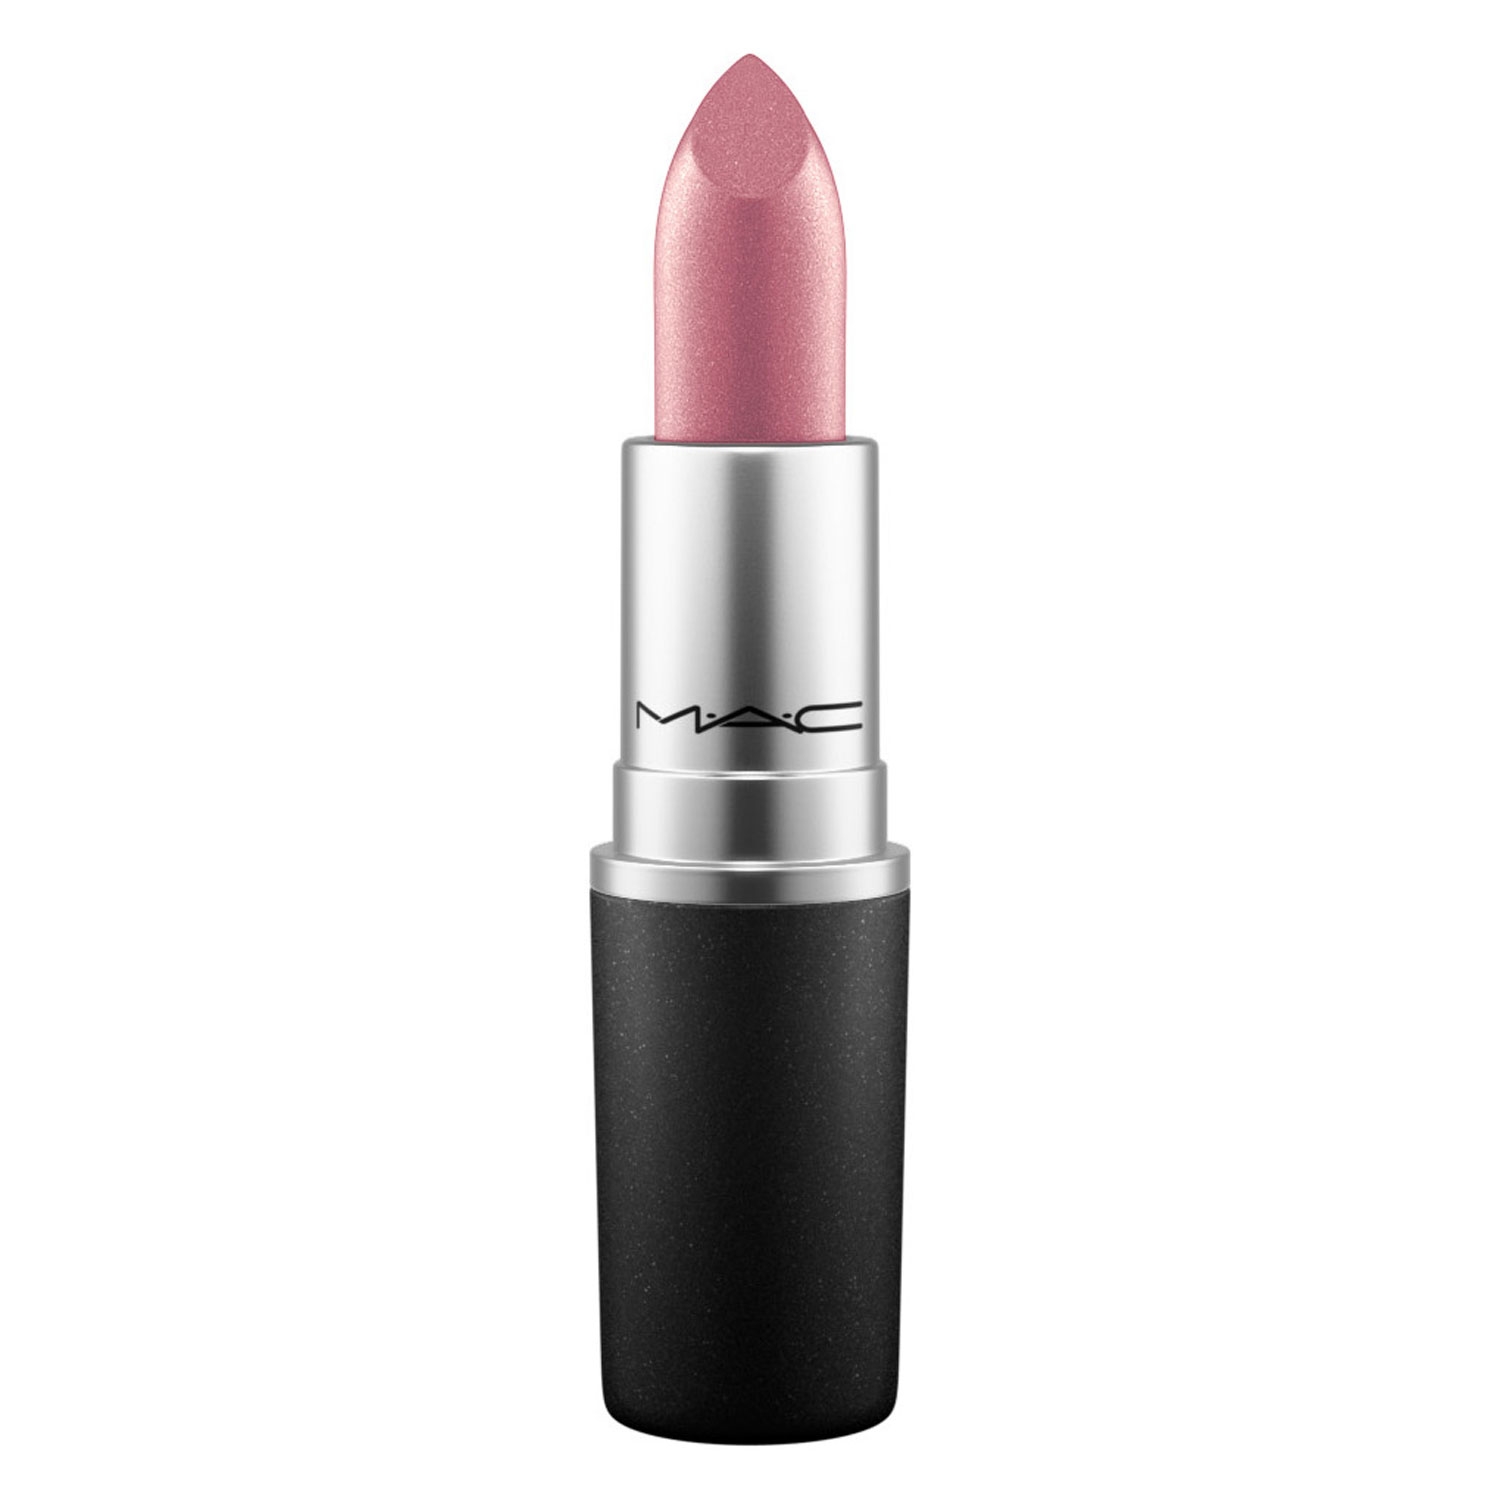 Product image from Frost Lipstick - Plum Dandy